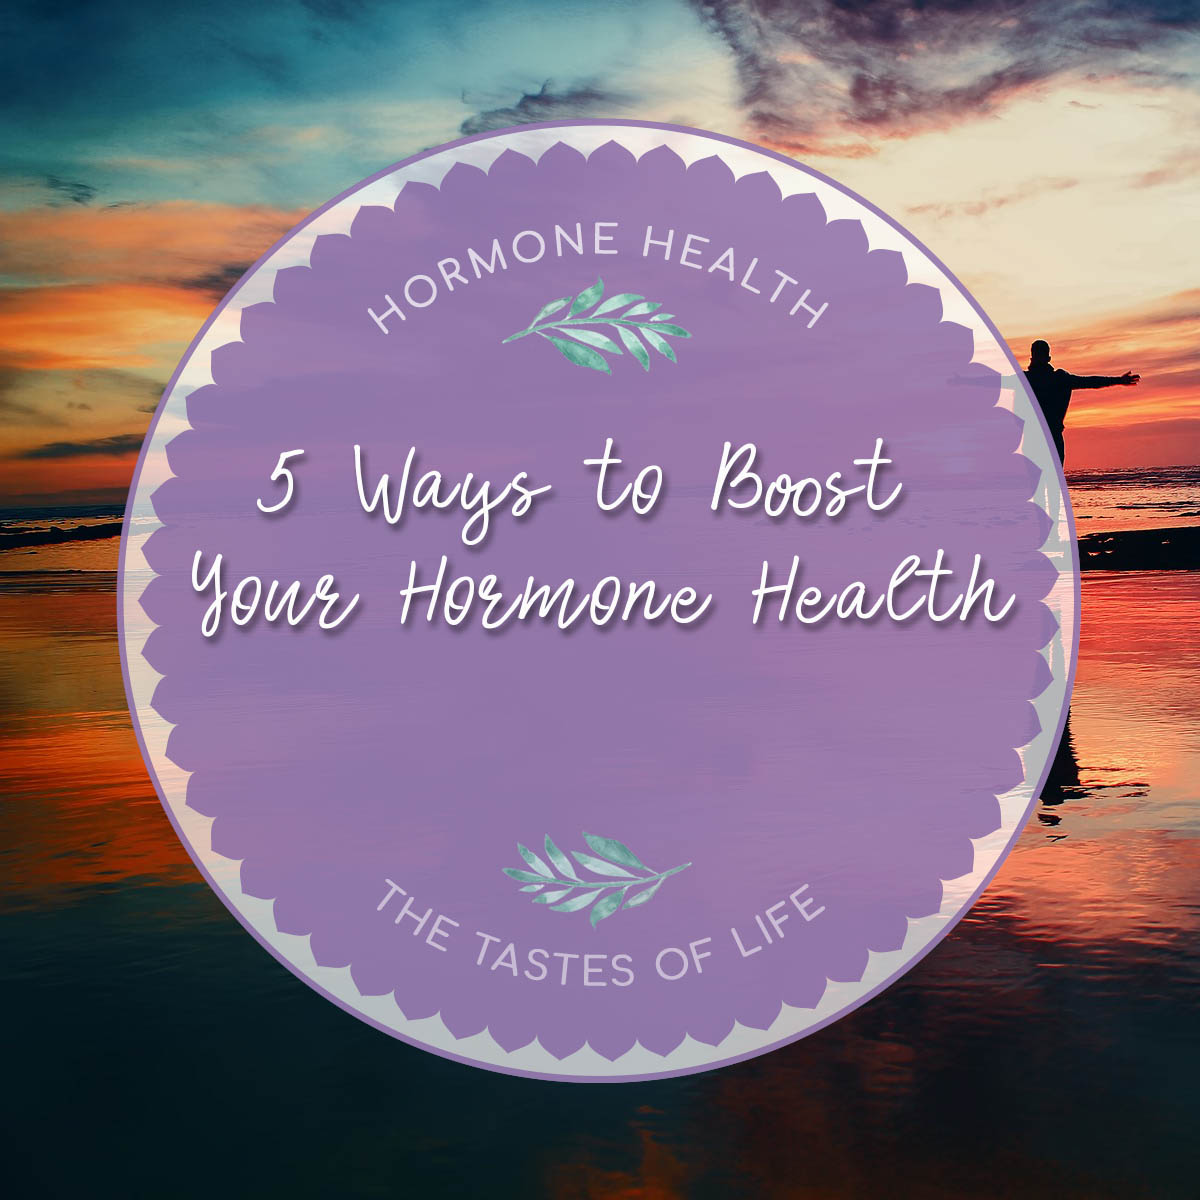 5 Ways To Boost Your Hormones Naturally